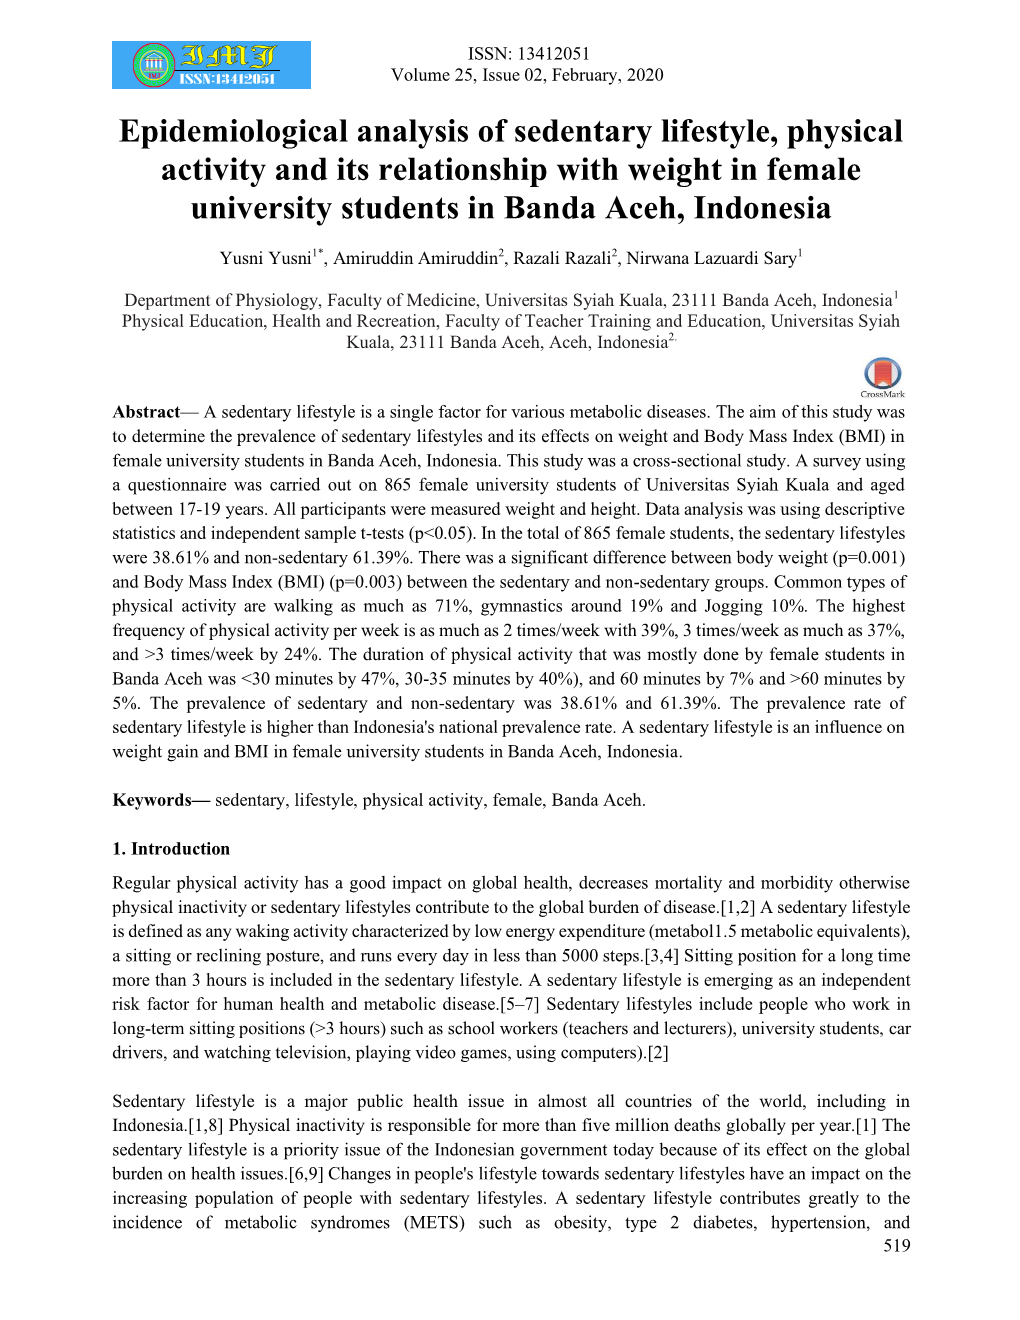 Epidemiological Analysis of Sedentary Lifestyle, Physical Activity and Its Relationship with Weight in Female University Students in Banda Aceh, Indonesia